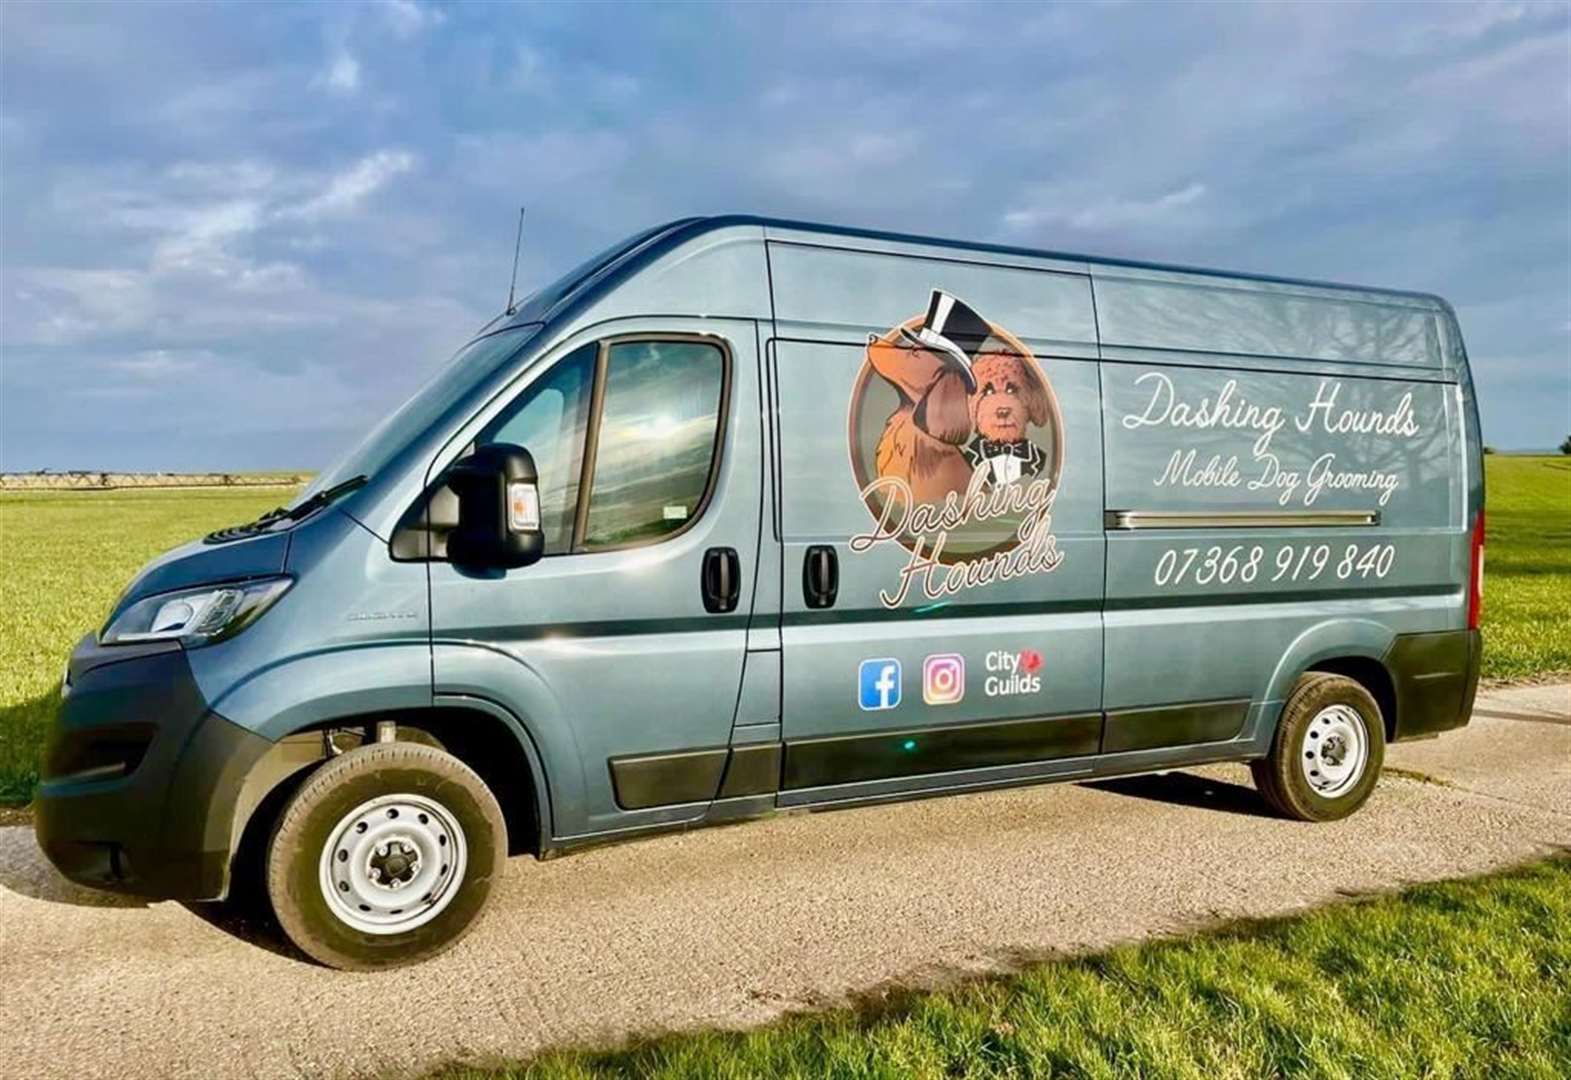 A look inside the dog grooming salon on wheels